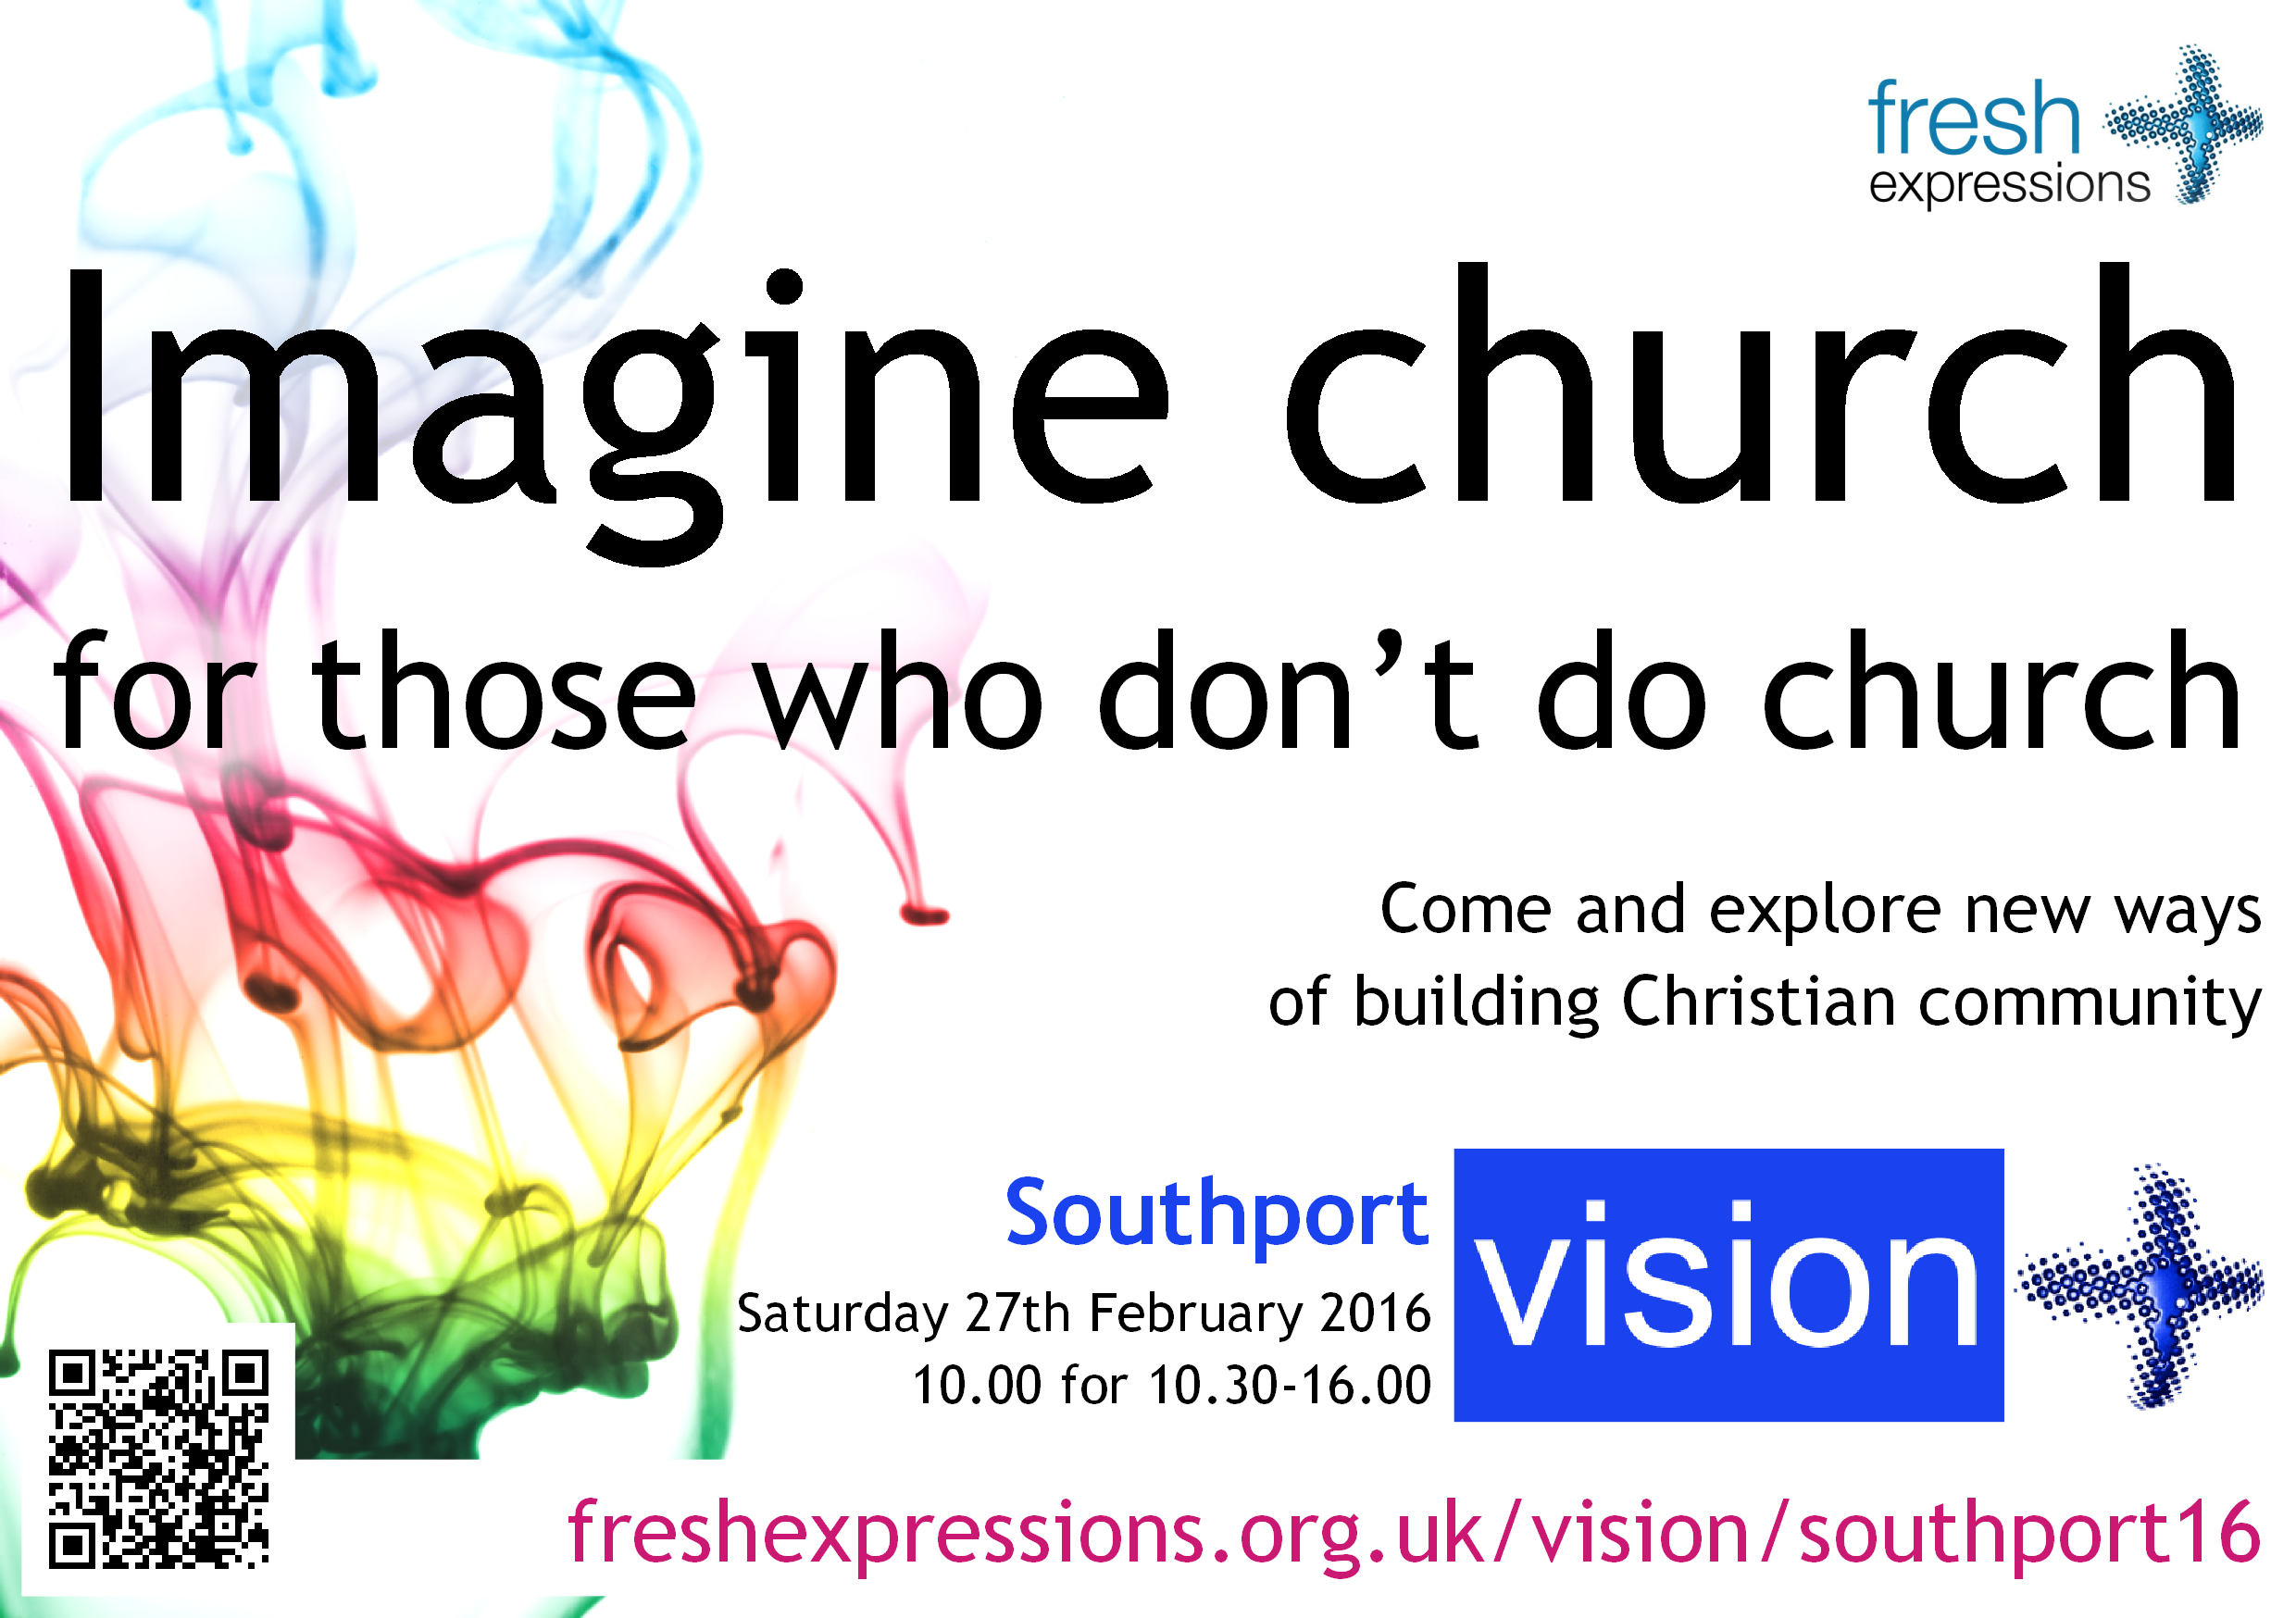 Southport vision event